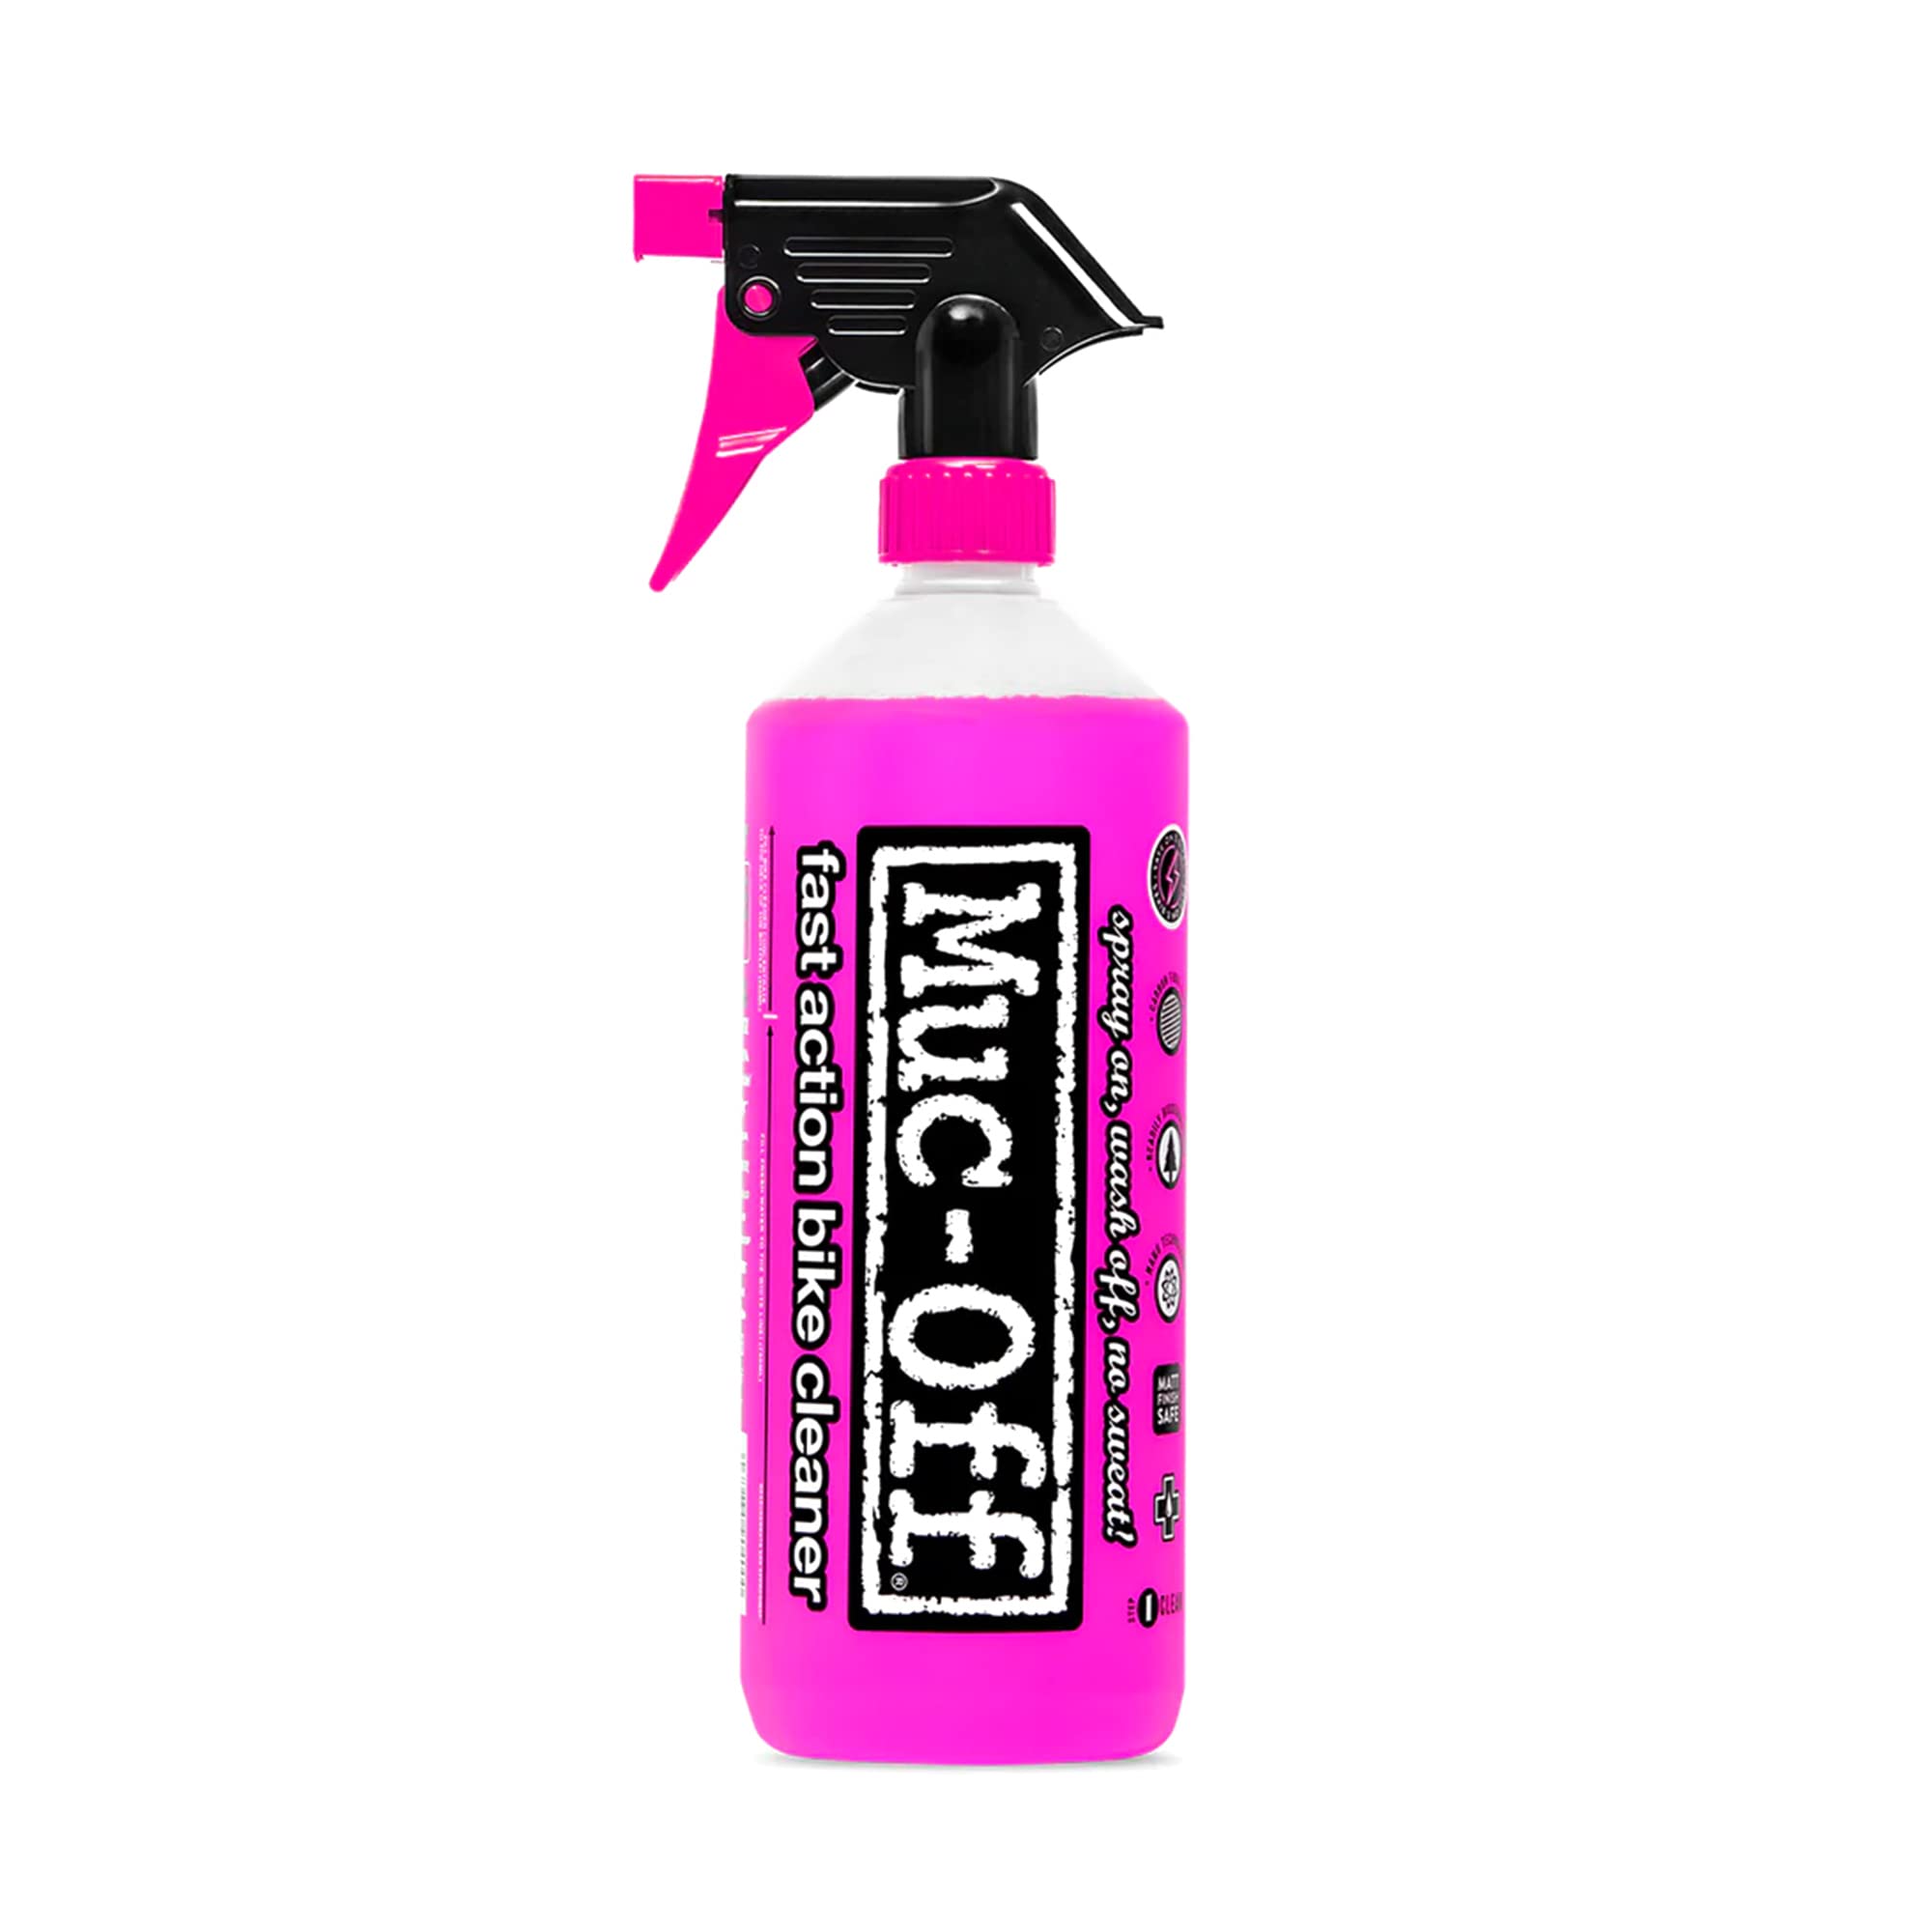 MUC-OFF | Nano Tech Bike Cleaner 1L capped with trigger